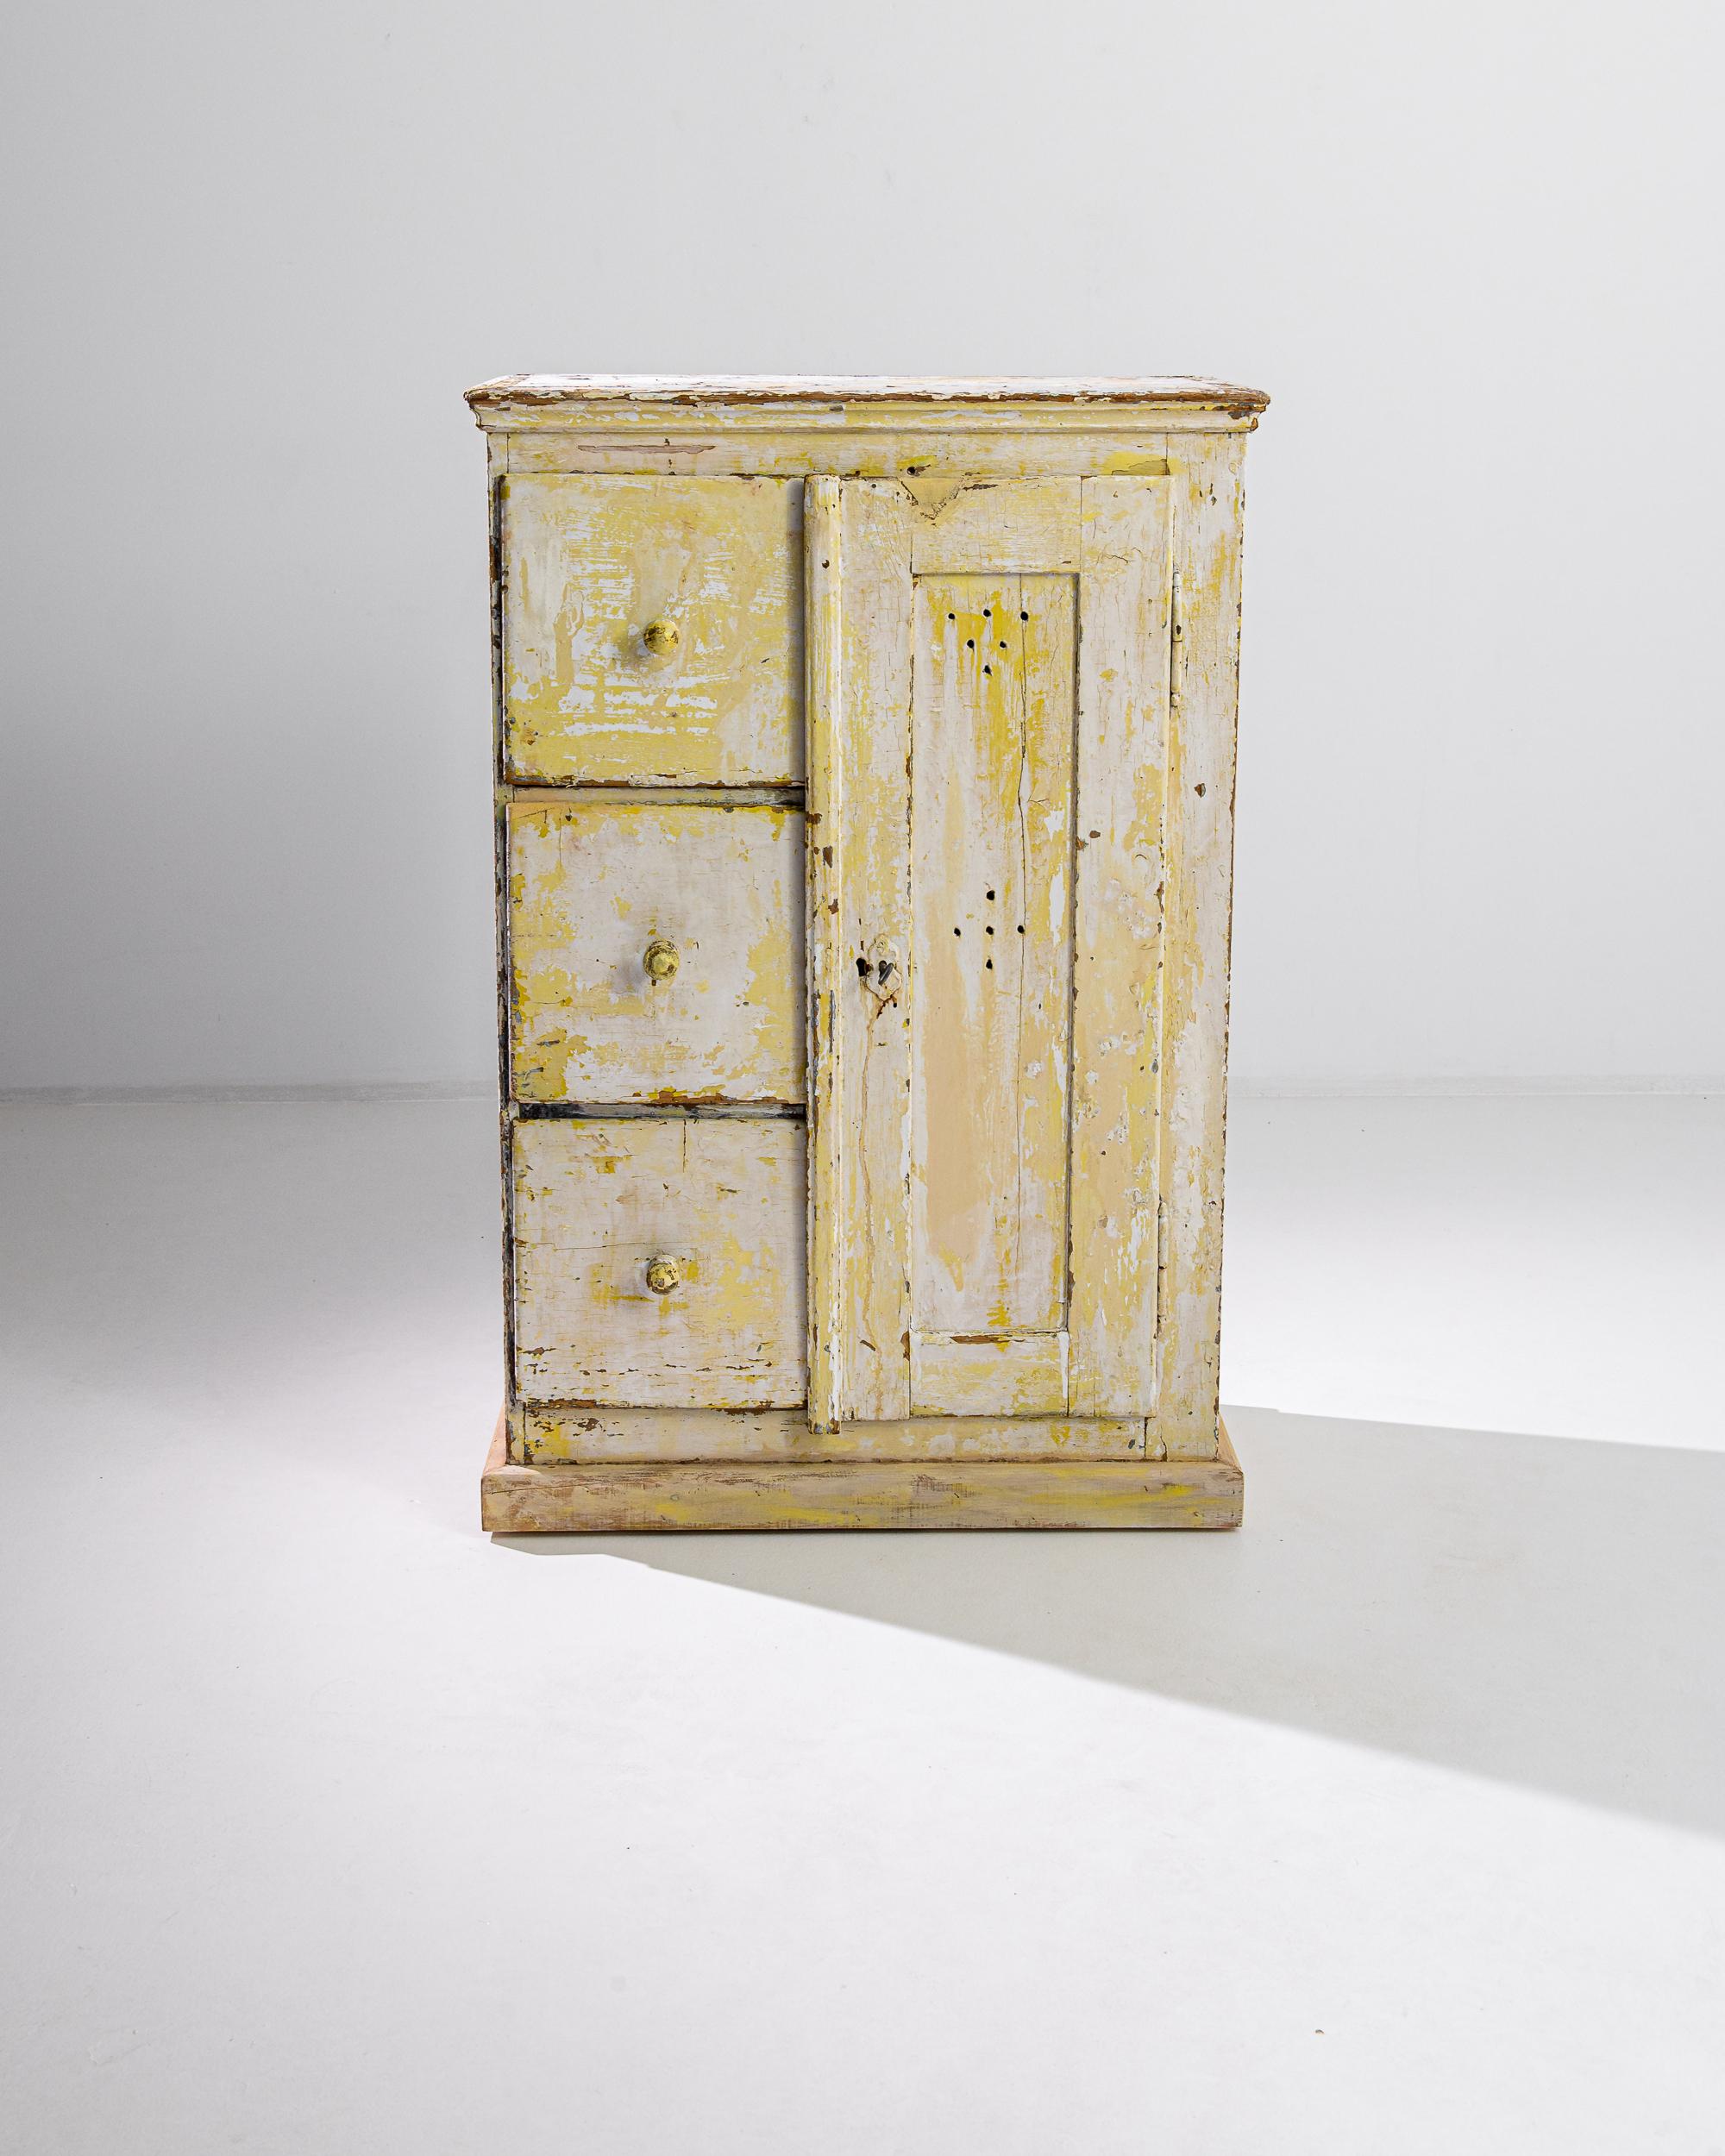 Crafted in Central Europe circa 1900, this wooden buffet flaunts the textural richness of its beautifully distressed finish, with the blurs of yellow patina emerging on the wooden surface. The plinth base and molded top frame the case divided by